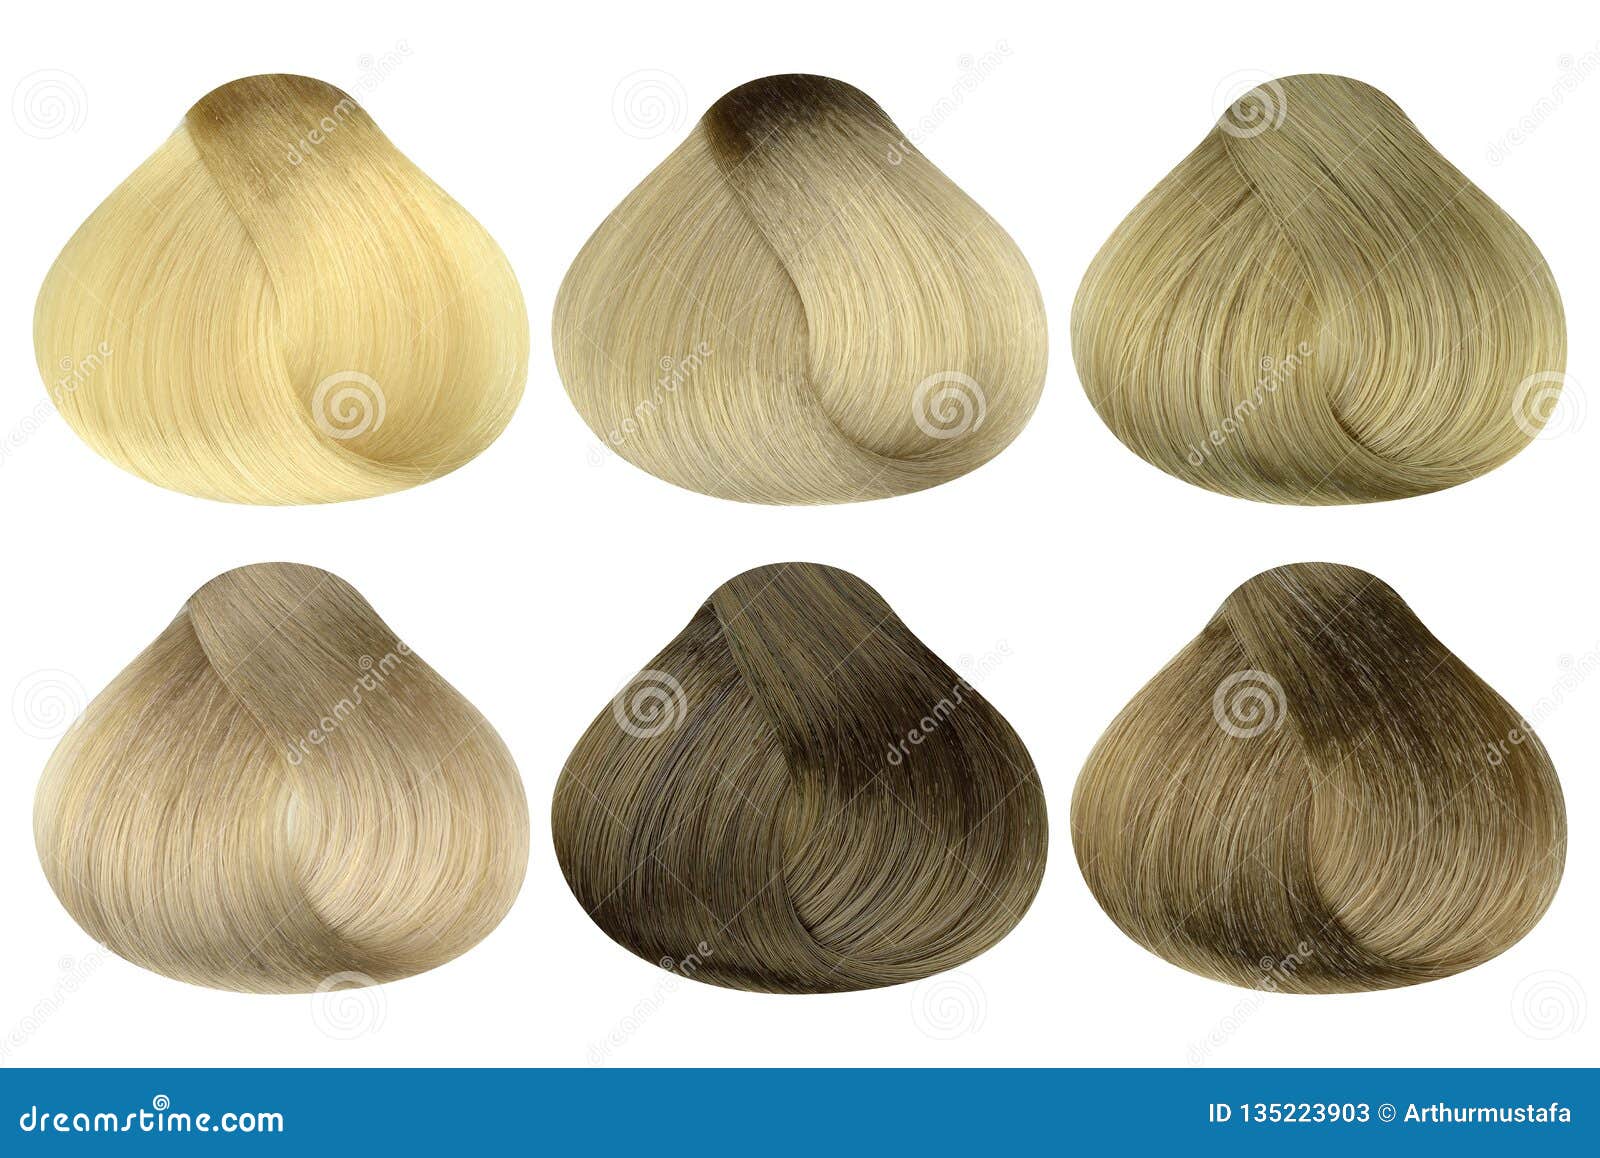 Set of Locks of Six Different Blonde Hair Color Samples & X28;bleaching  Cream, Very Light Blonde, Light Blonde, Beige Blonde, Dark Stock Image -  Image of swatches, haircare: 135223903